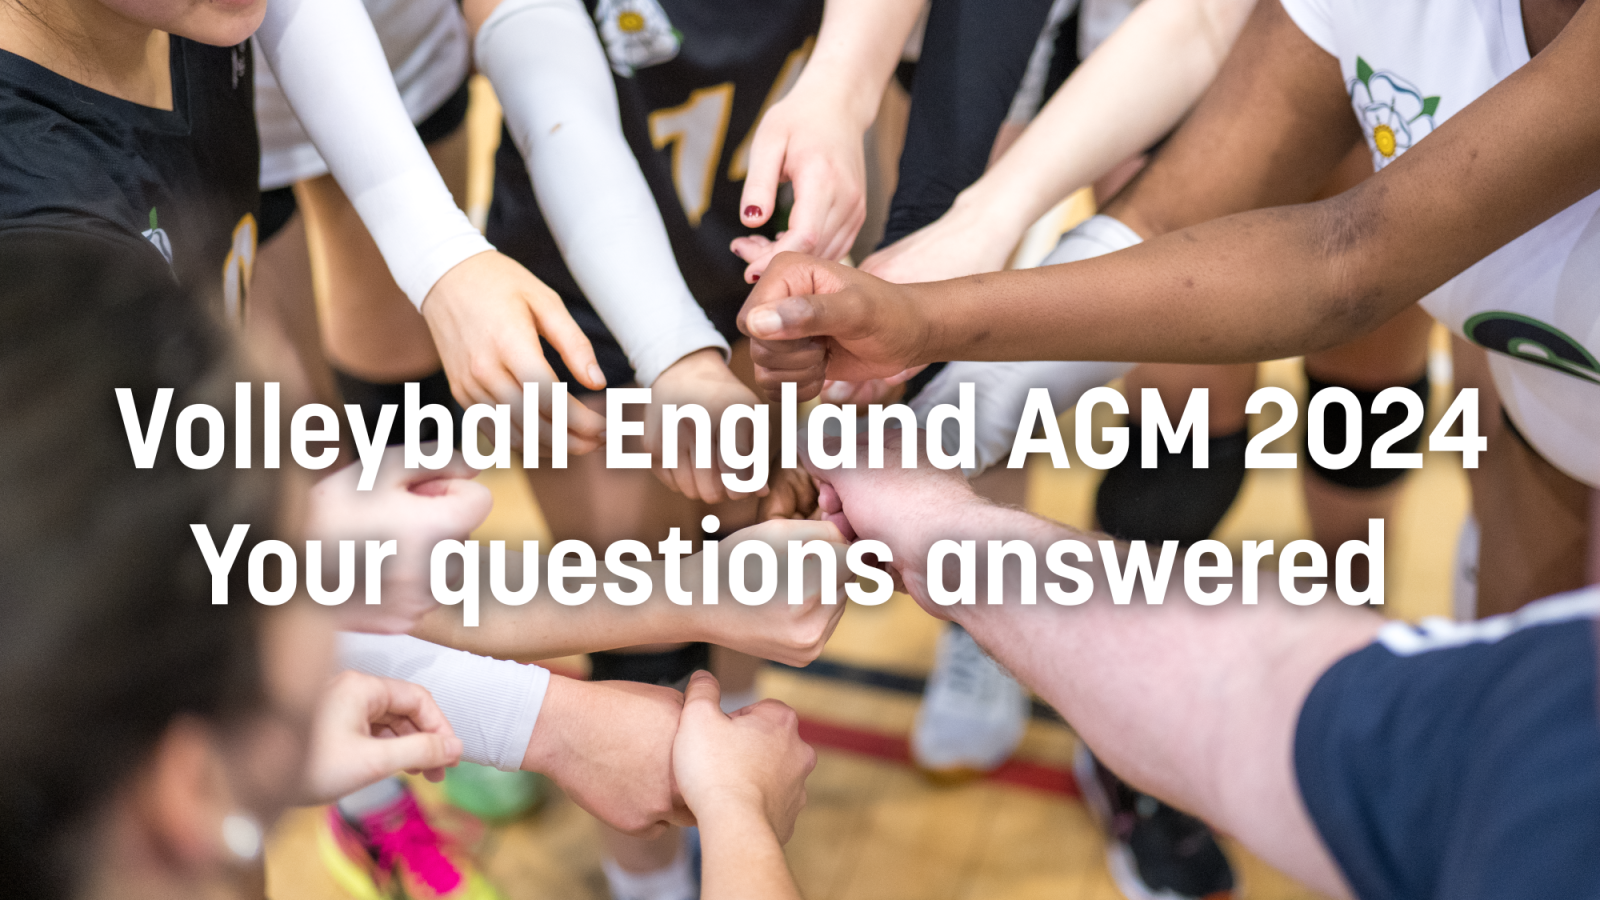 Volleyball England AGM 2024: Your questions answered